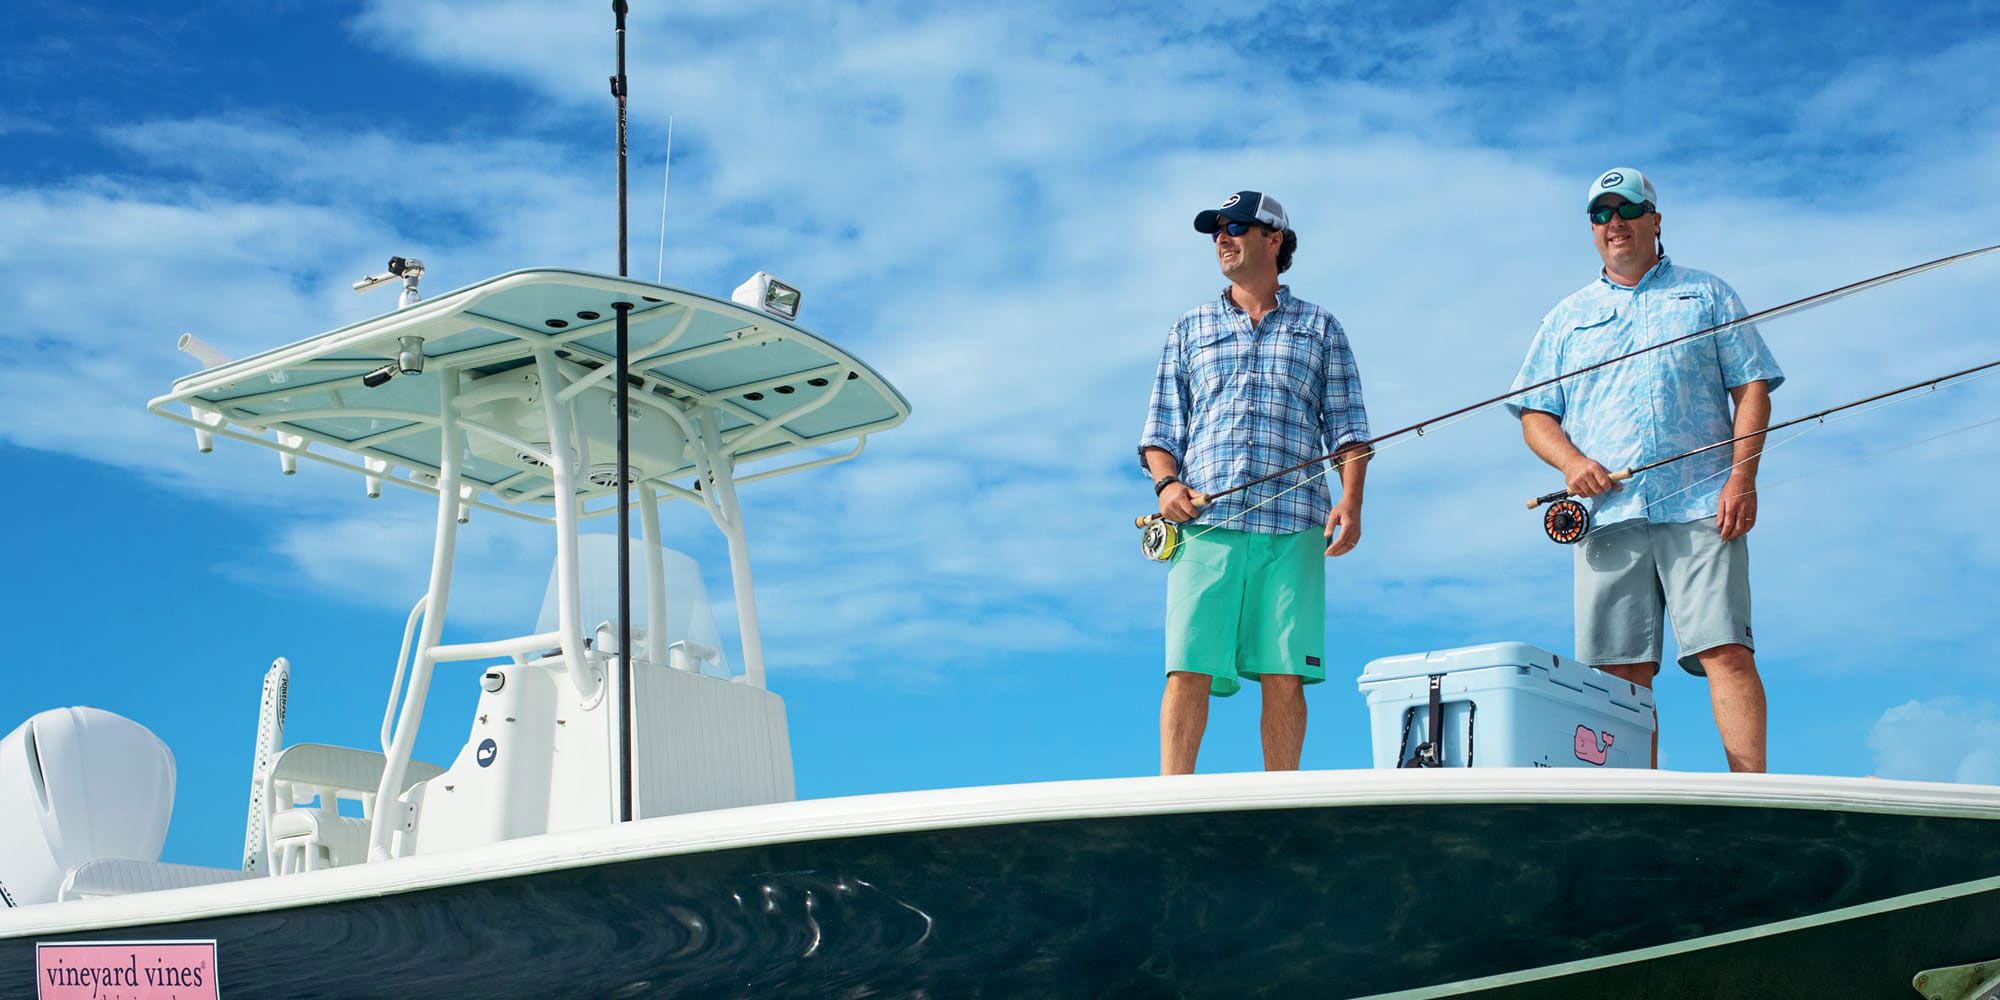 Travel Tidewater Teal Clothes